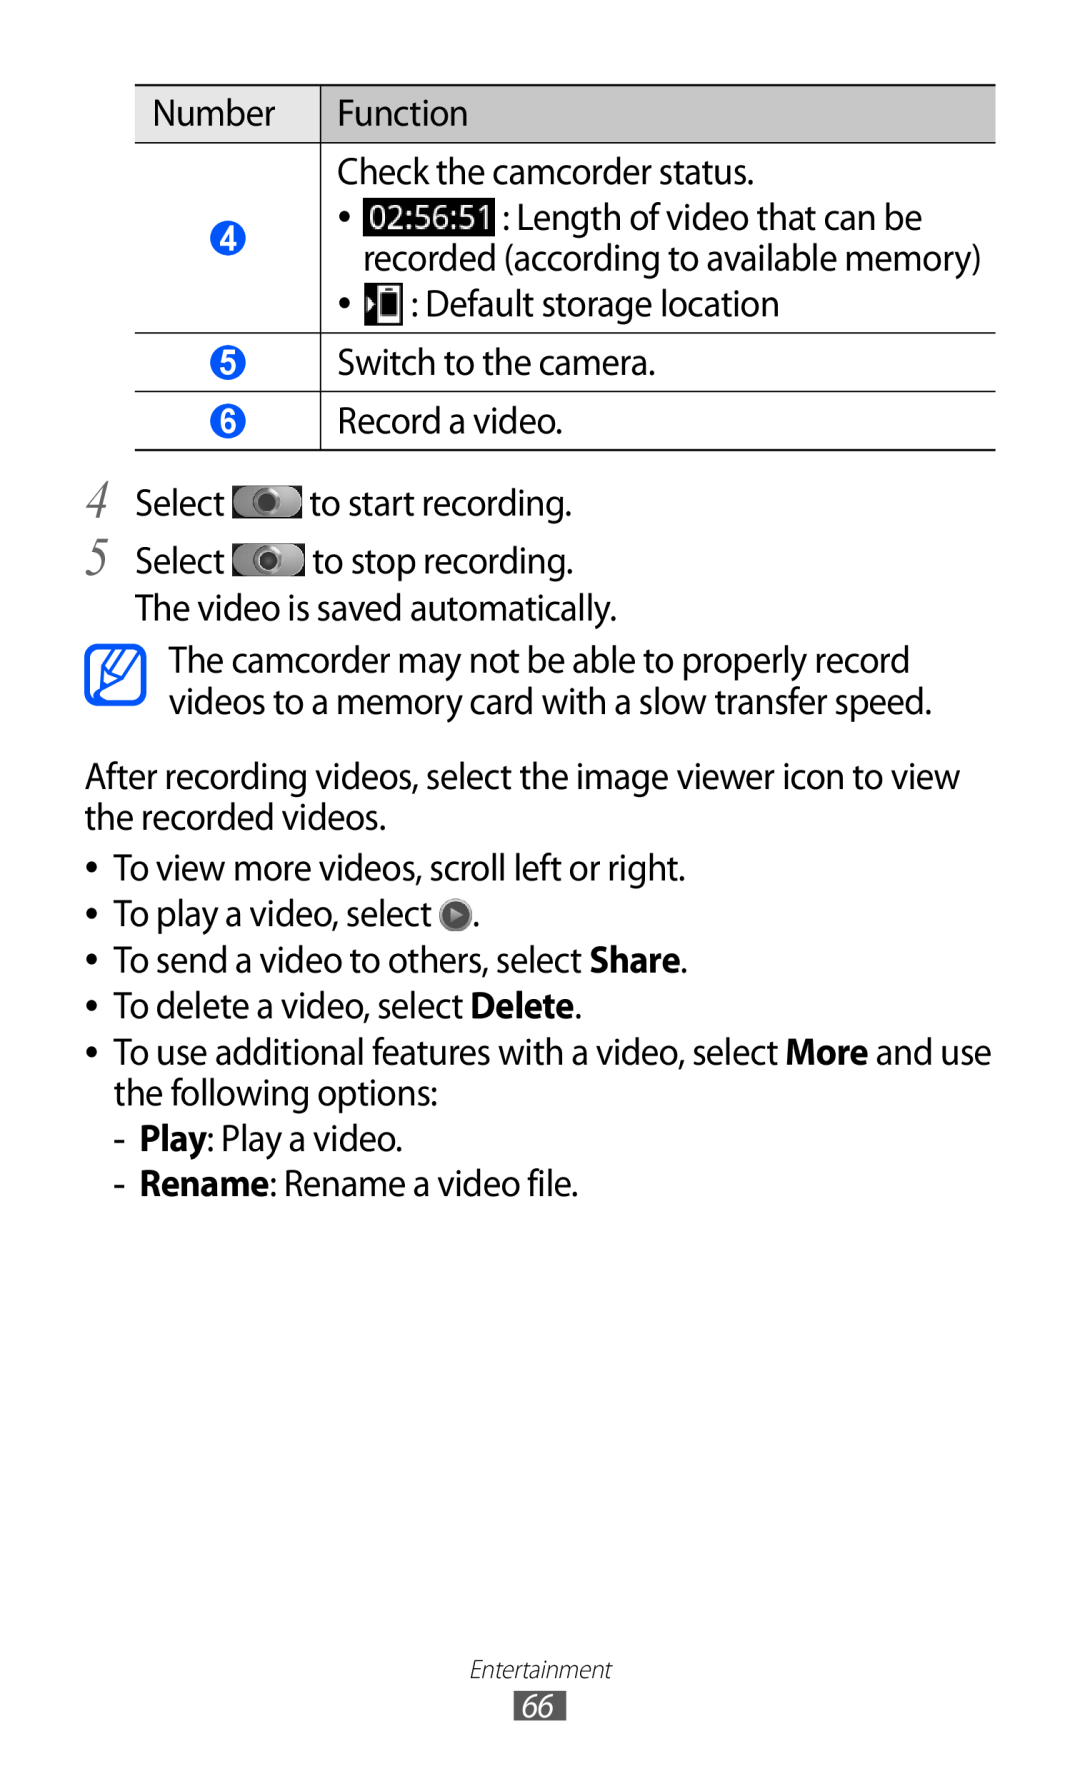 Samsung GT-I9070 recorded according to available memory, Select to stop recording. The video is saved automatically 